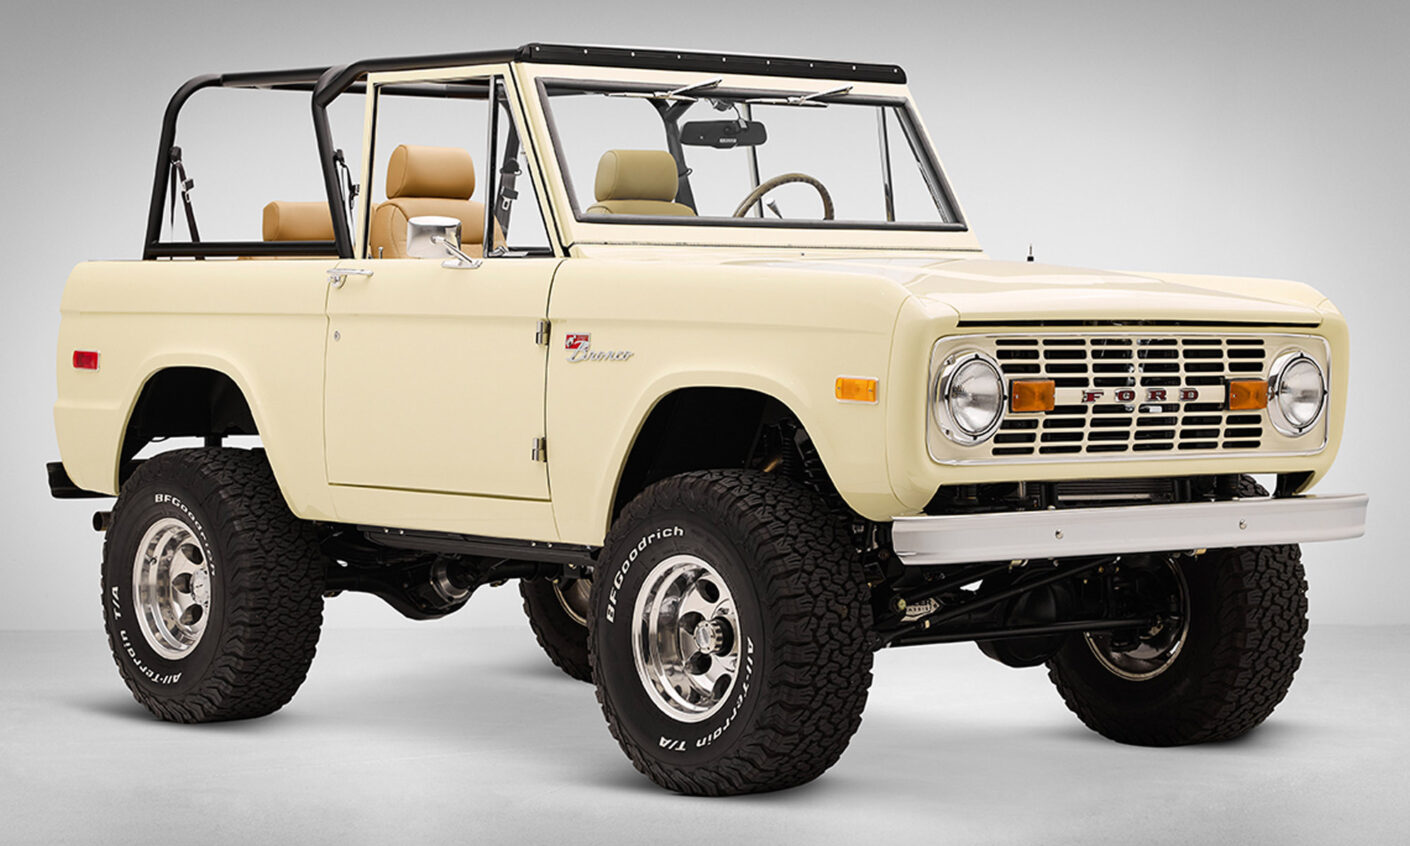 https://classicfordbroncos.com/wp-content/uploads/2023/06/1966-classic-ford-bronco-phonecian-yellow-coyote-series-passenger-front-34-2-1410x846.jpg